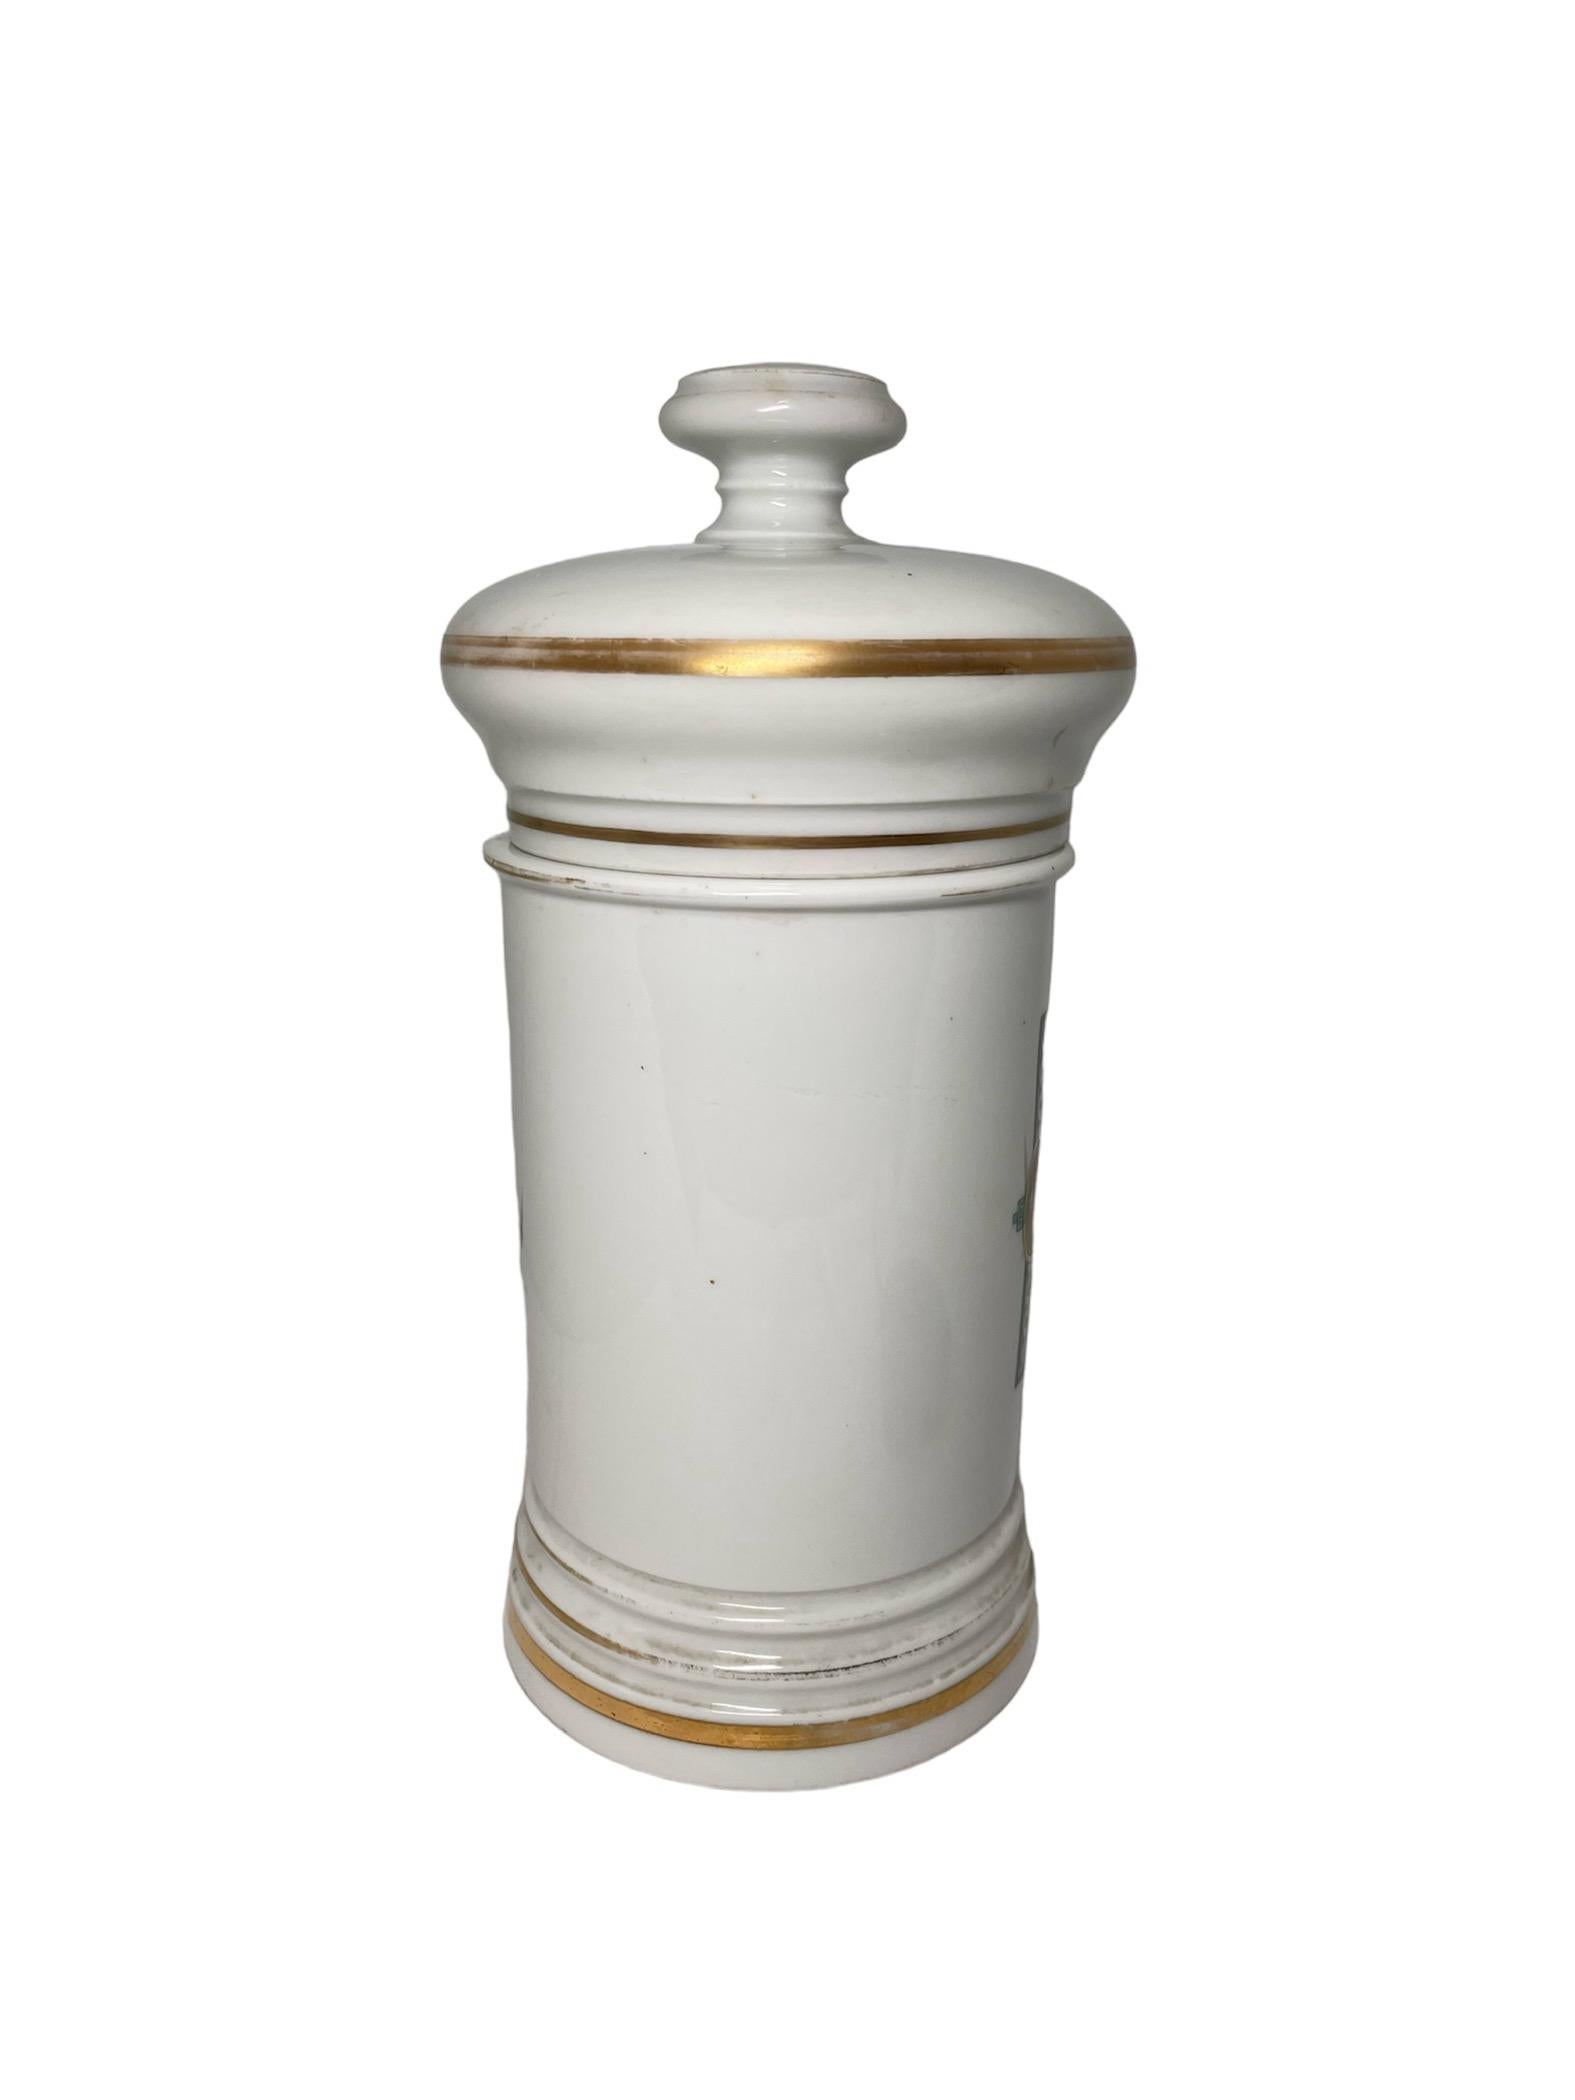 Neoclassical Revival French Porcelain Apothecary Jar For Sale